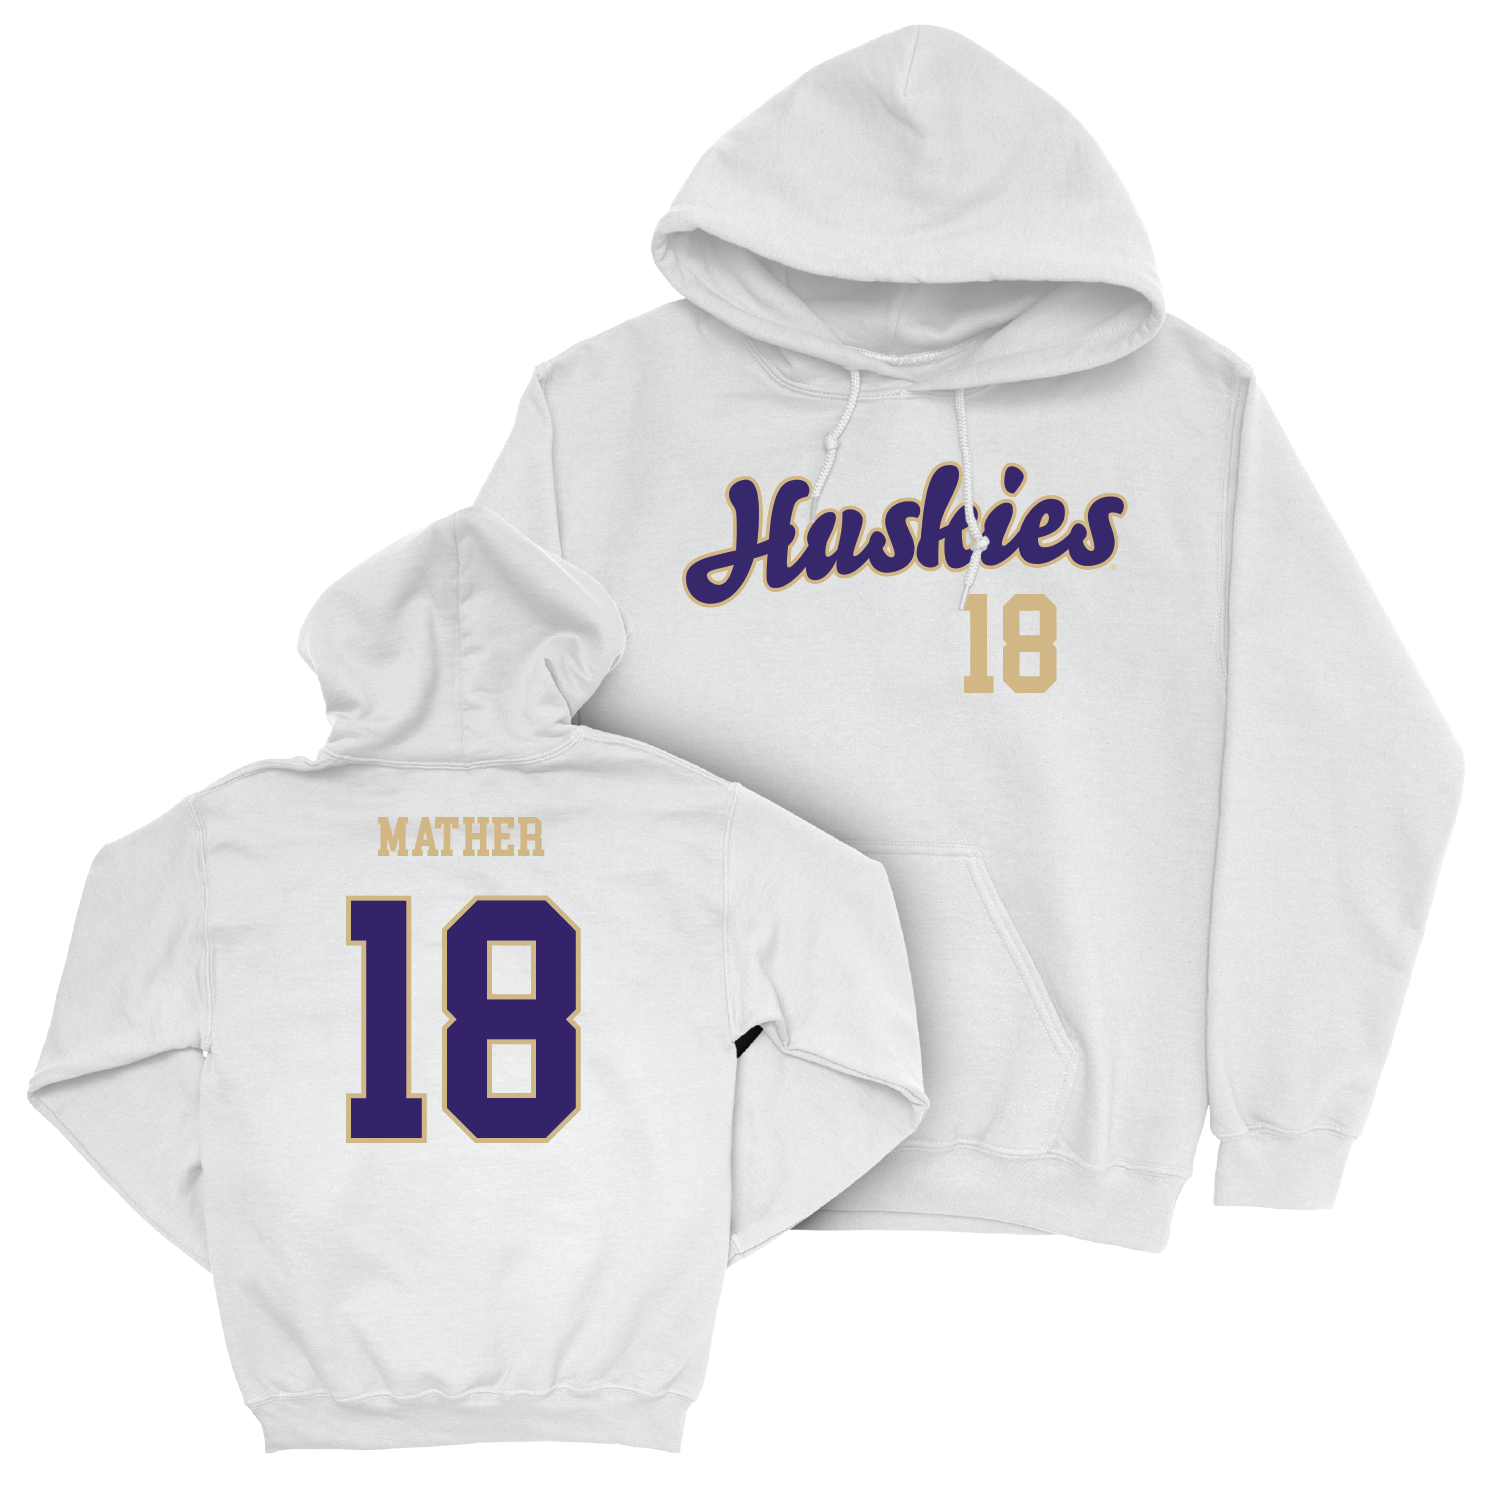 Women's Volleyball White Script Hoodie - Kendall Mather Youth Small